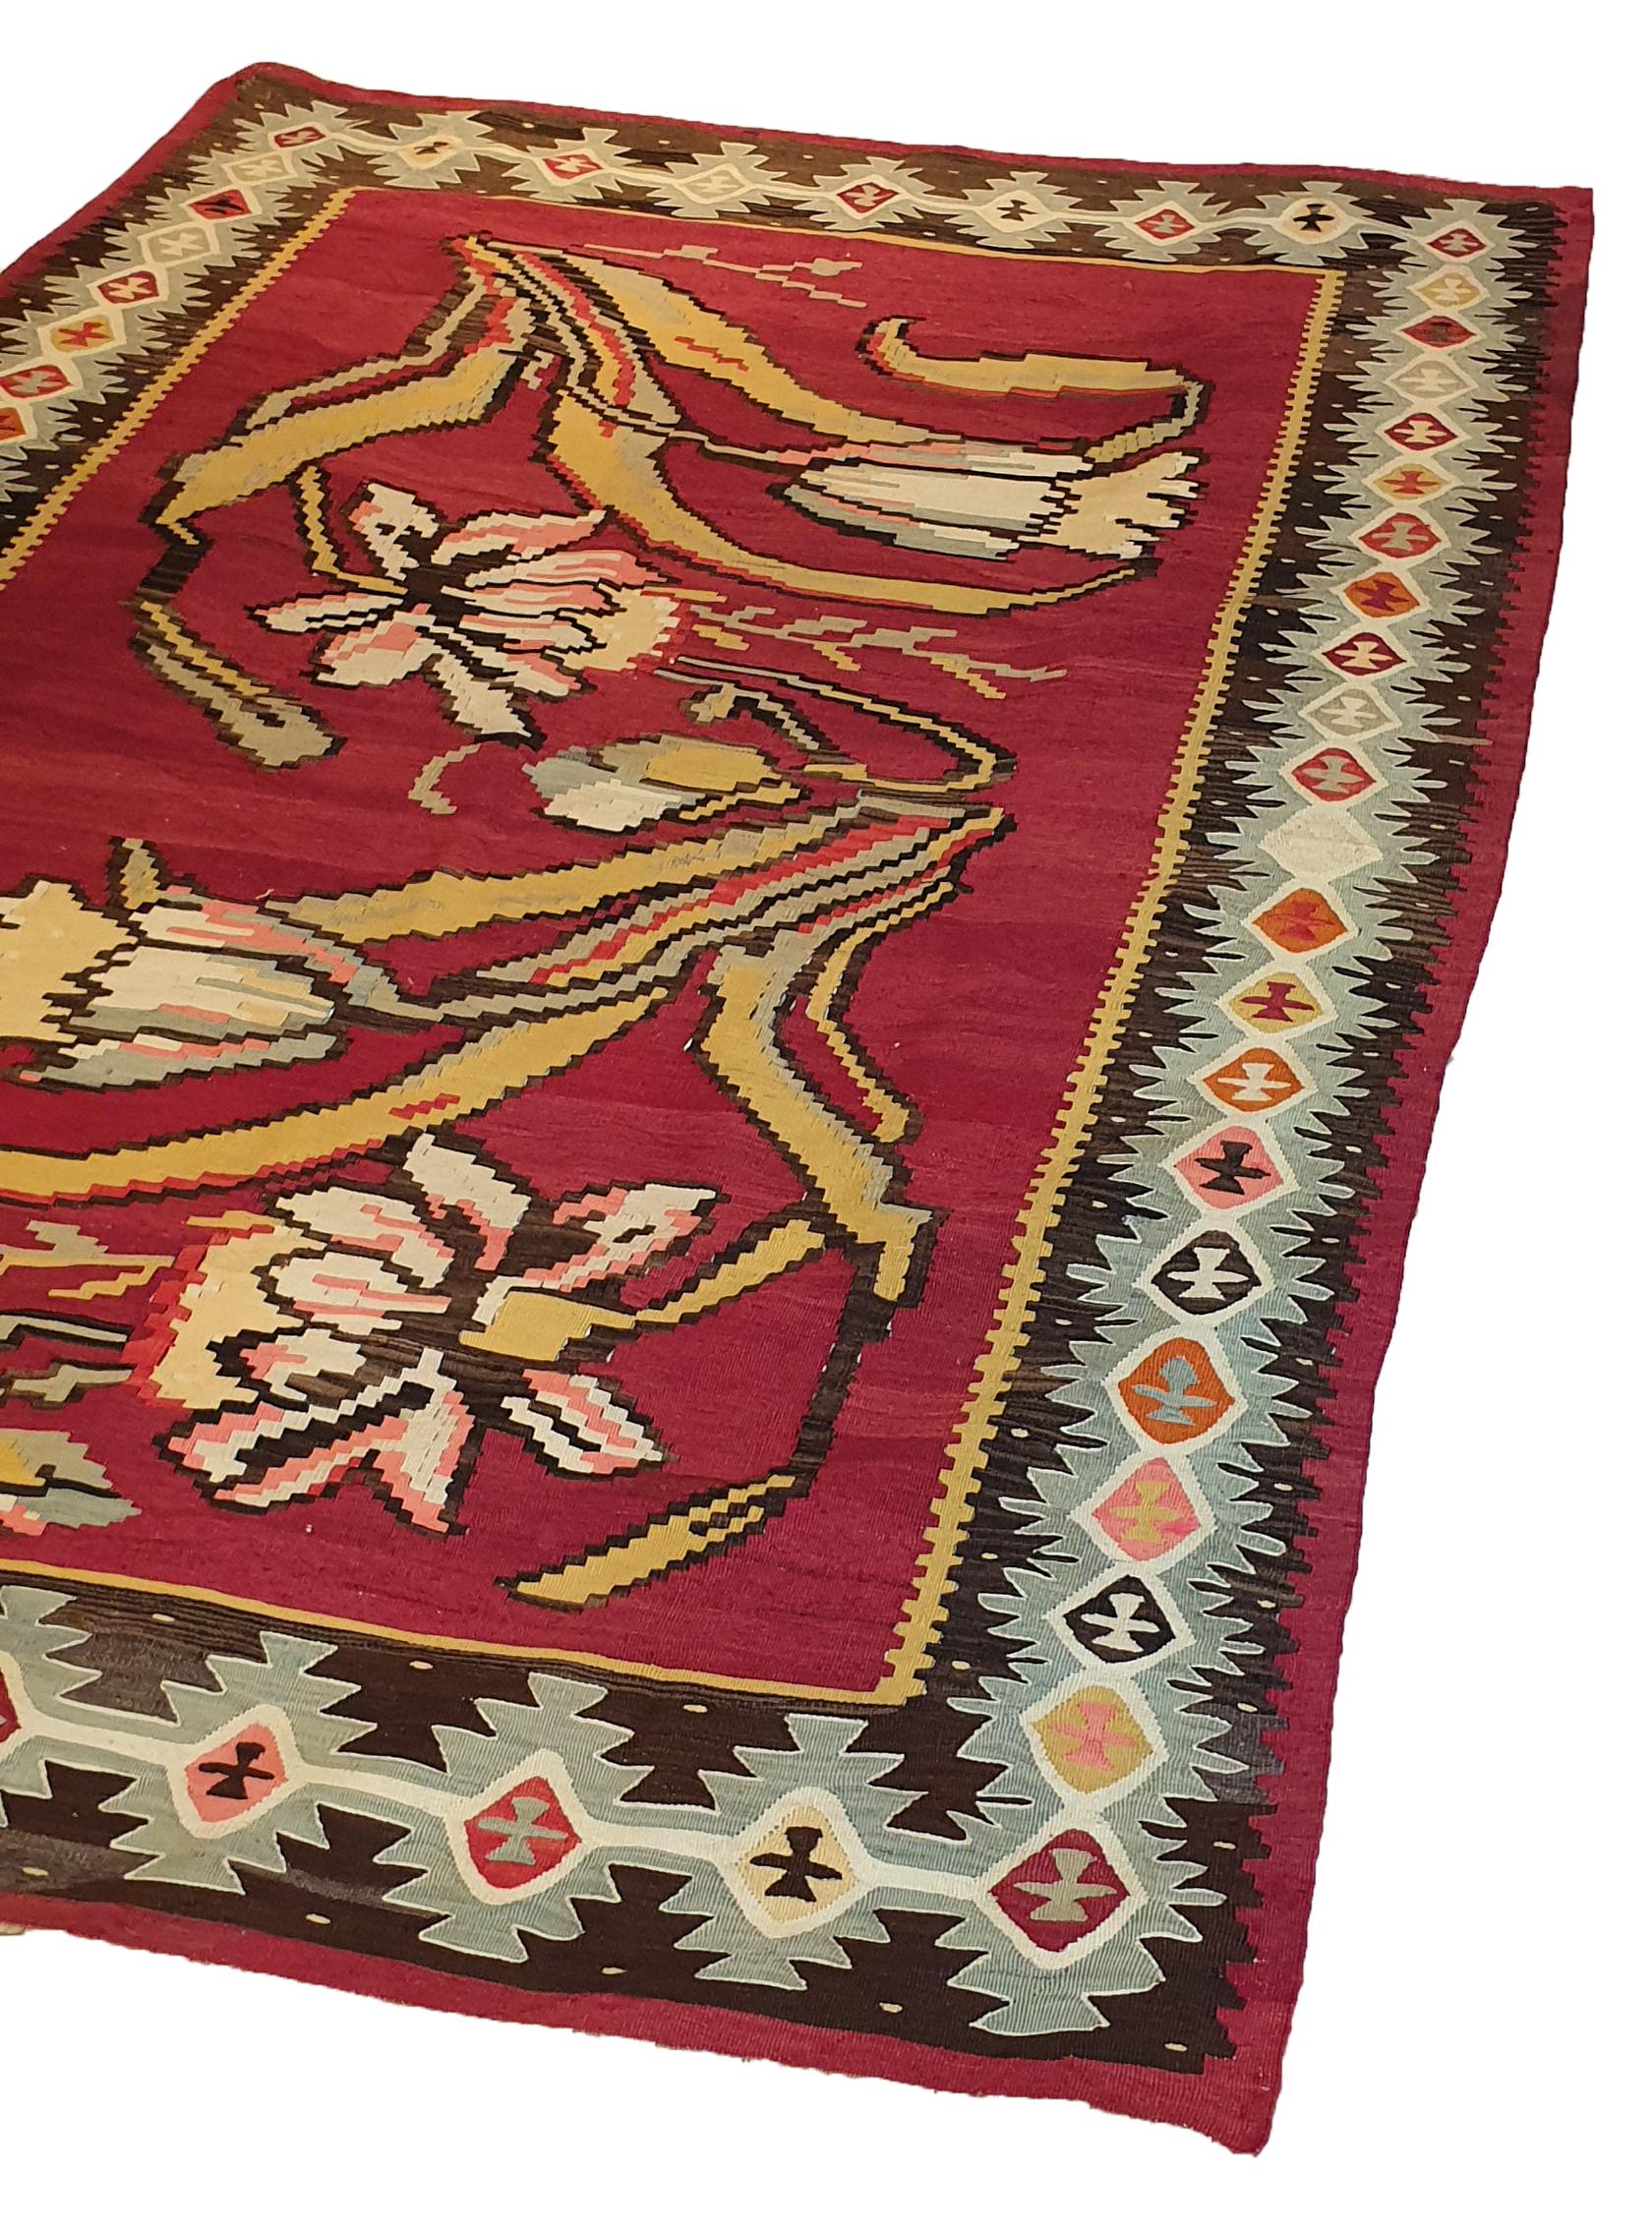 N° 699, Kilim Sarloye handmade in Turkey in 19th century
High quality, beautiful graphics and remarkable finesse.
Perfect state of preservation.

Measures: 200 x 140 cm.
  